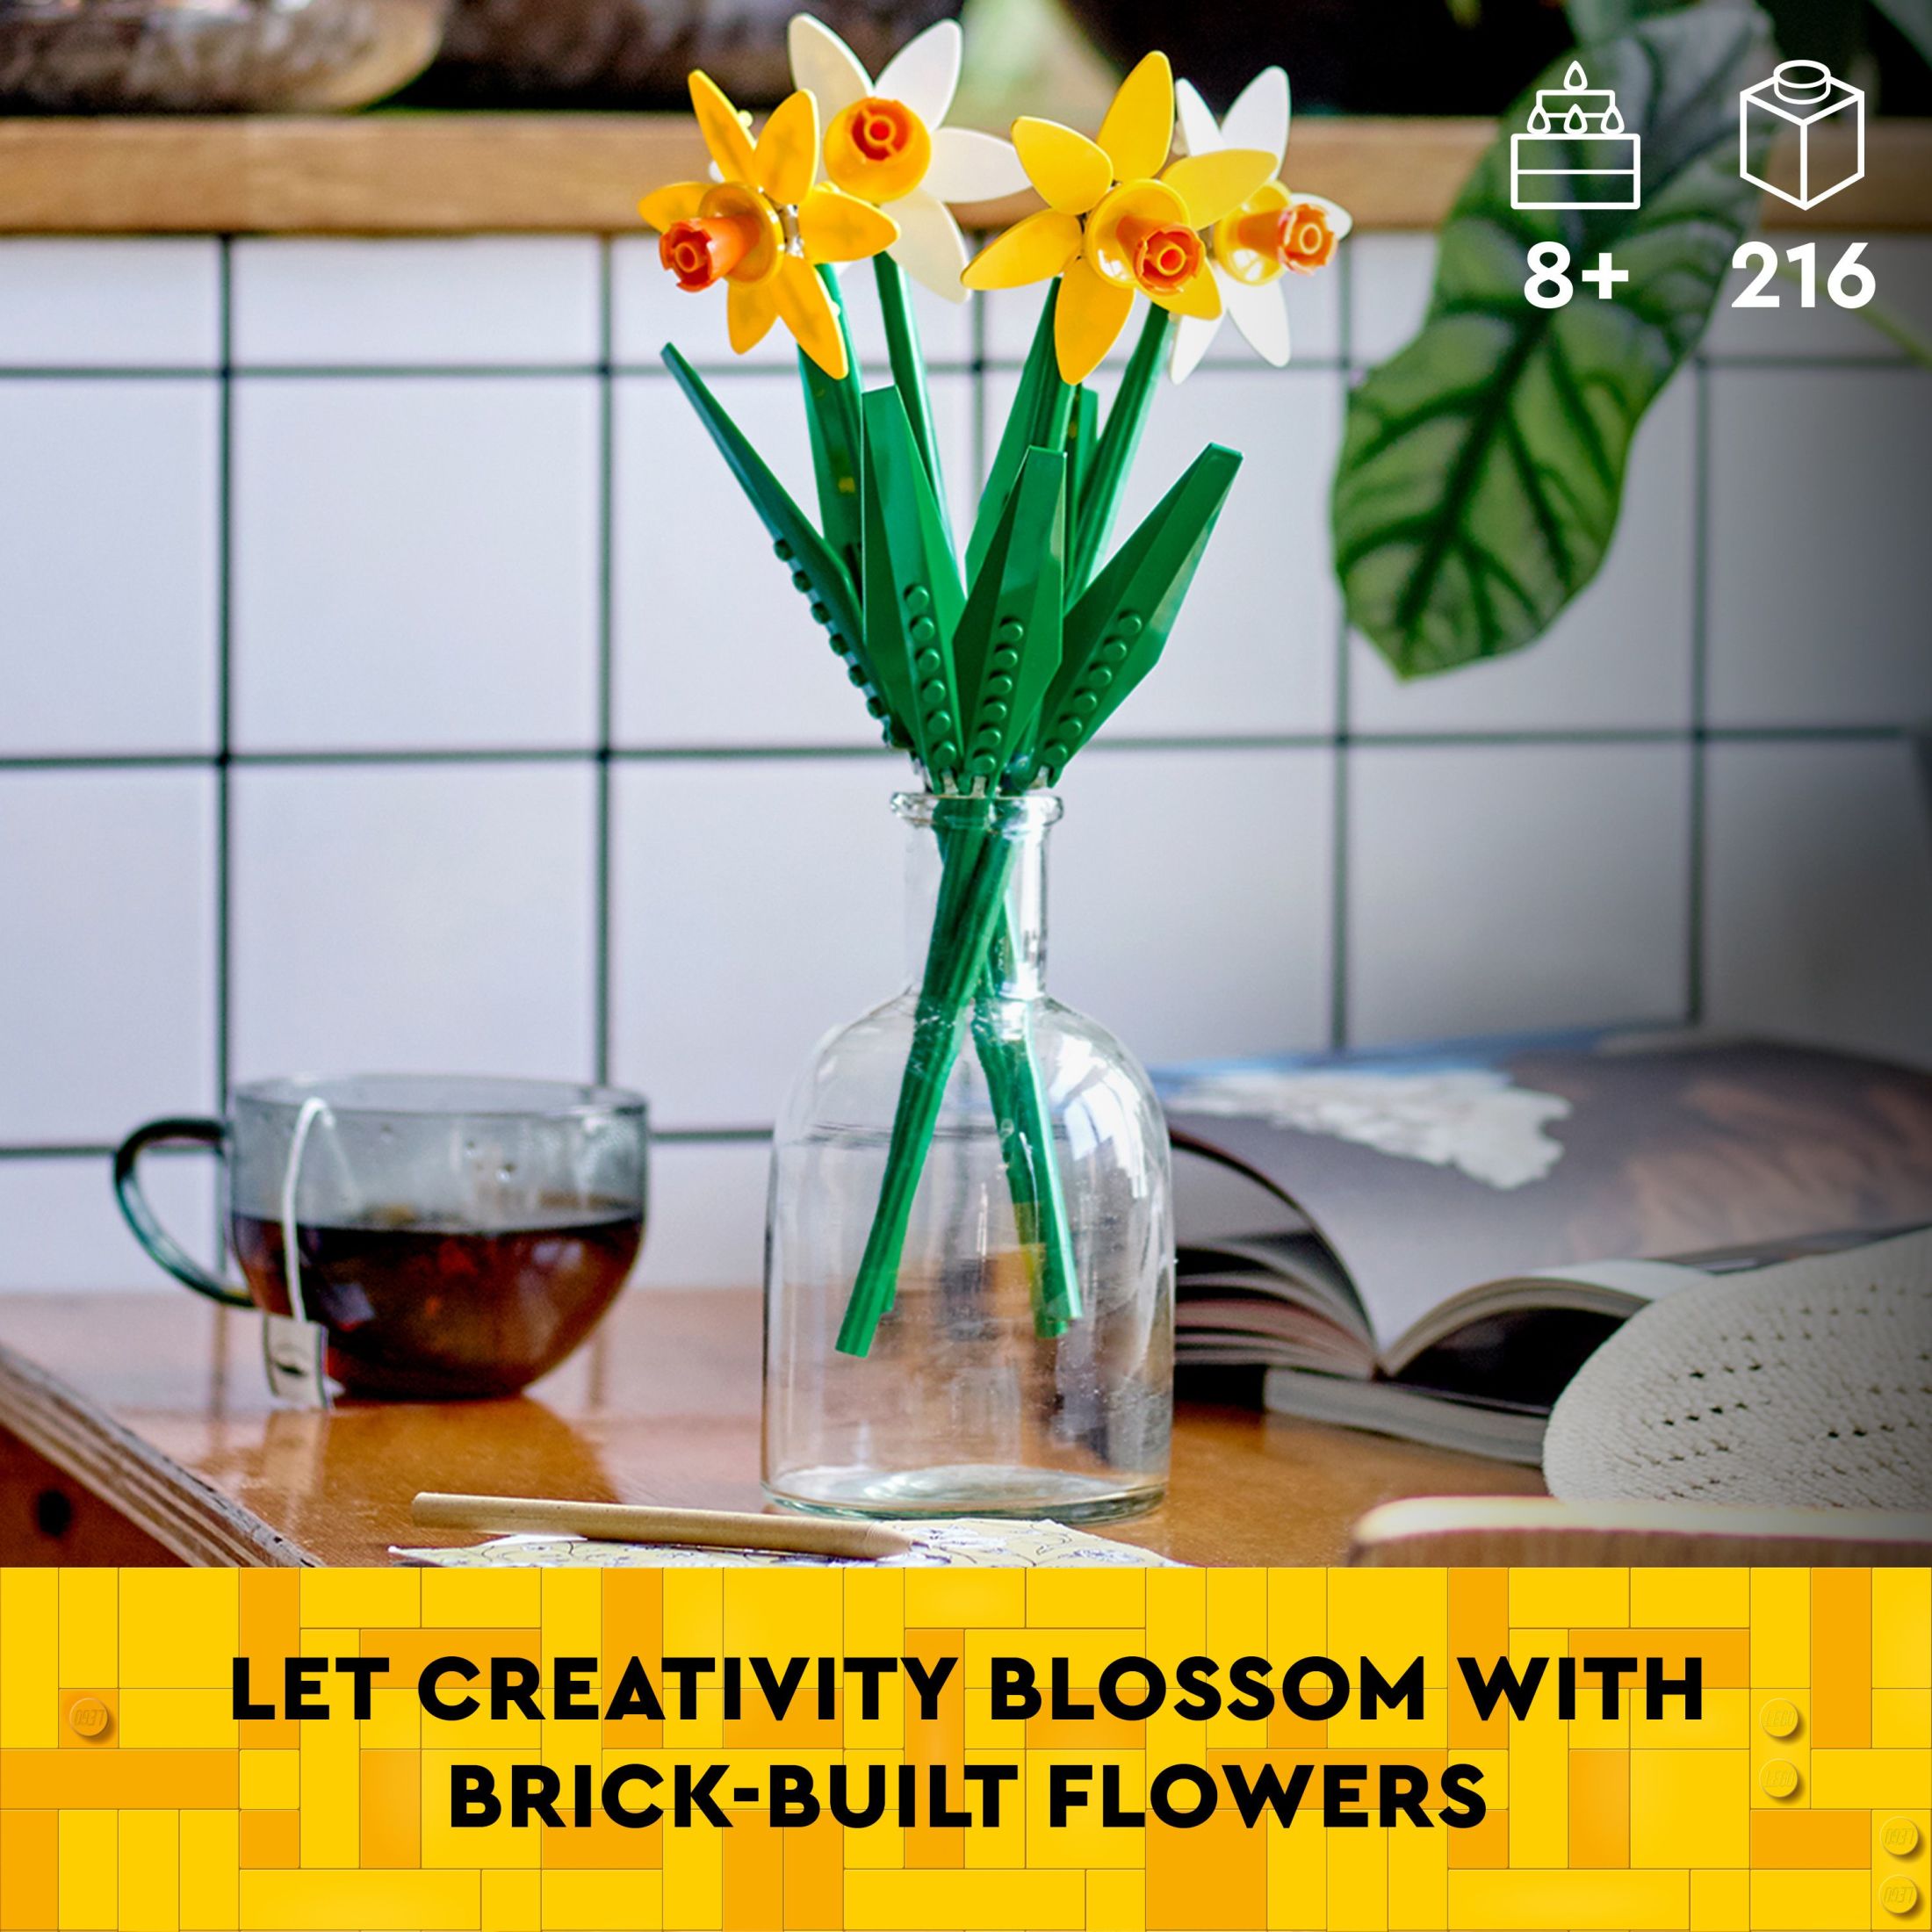 LEGO Daffodils Celebration Gift, Yellow and White Daffodils, Spring Flower Room Decor, Great Gift for Flower Lovers, 40747 - image 4 of 8